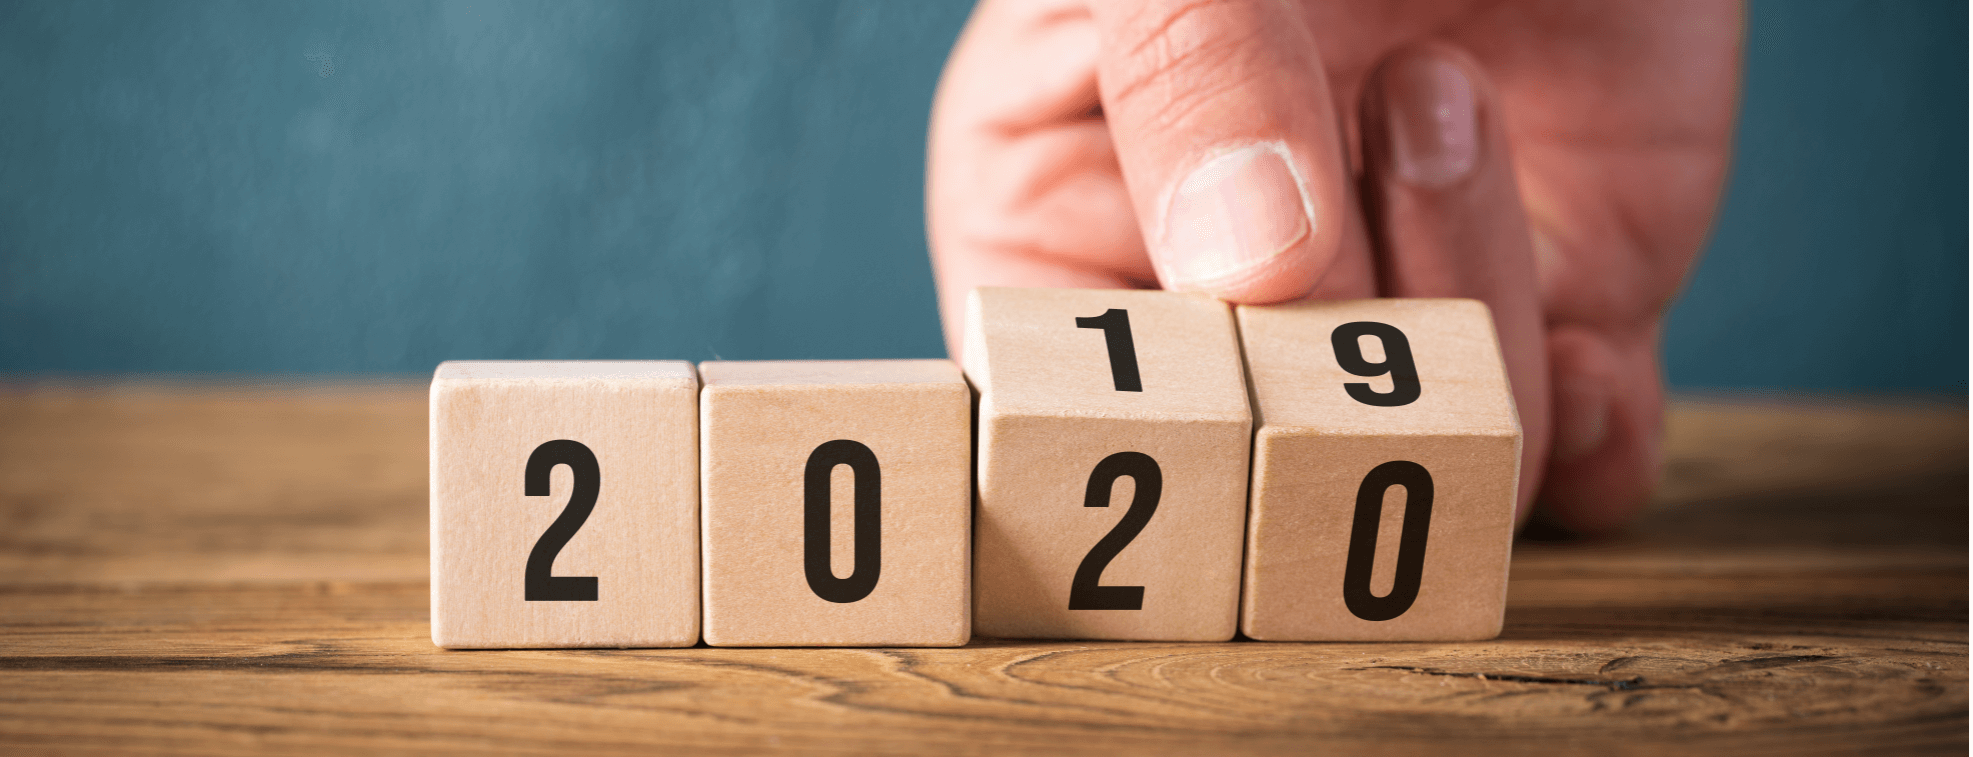 Person turning cubes with number from 2019 into 2020